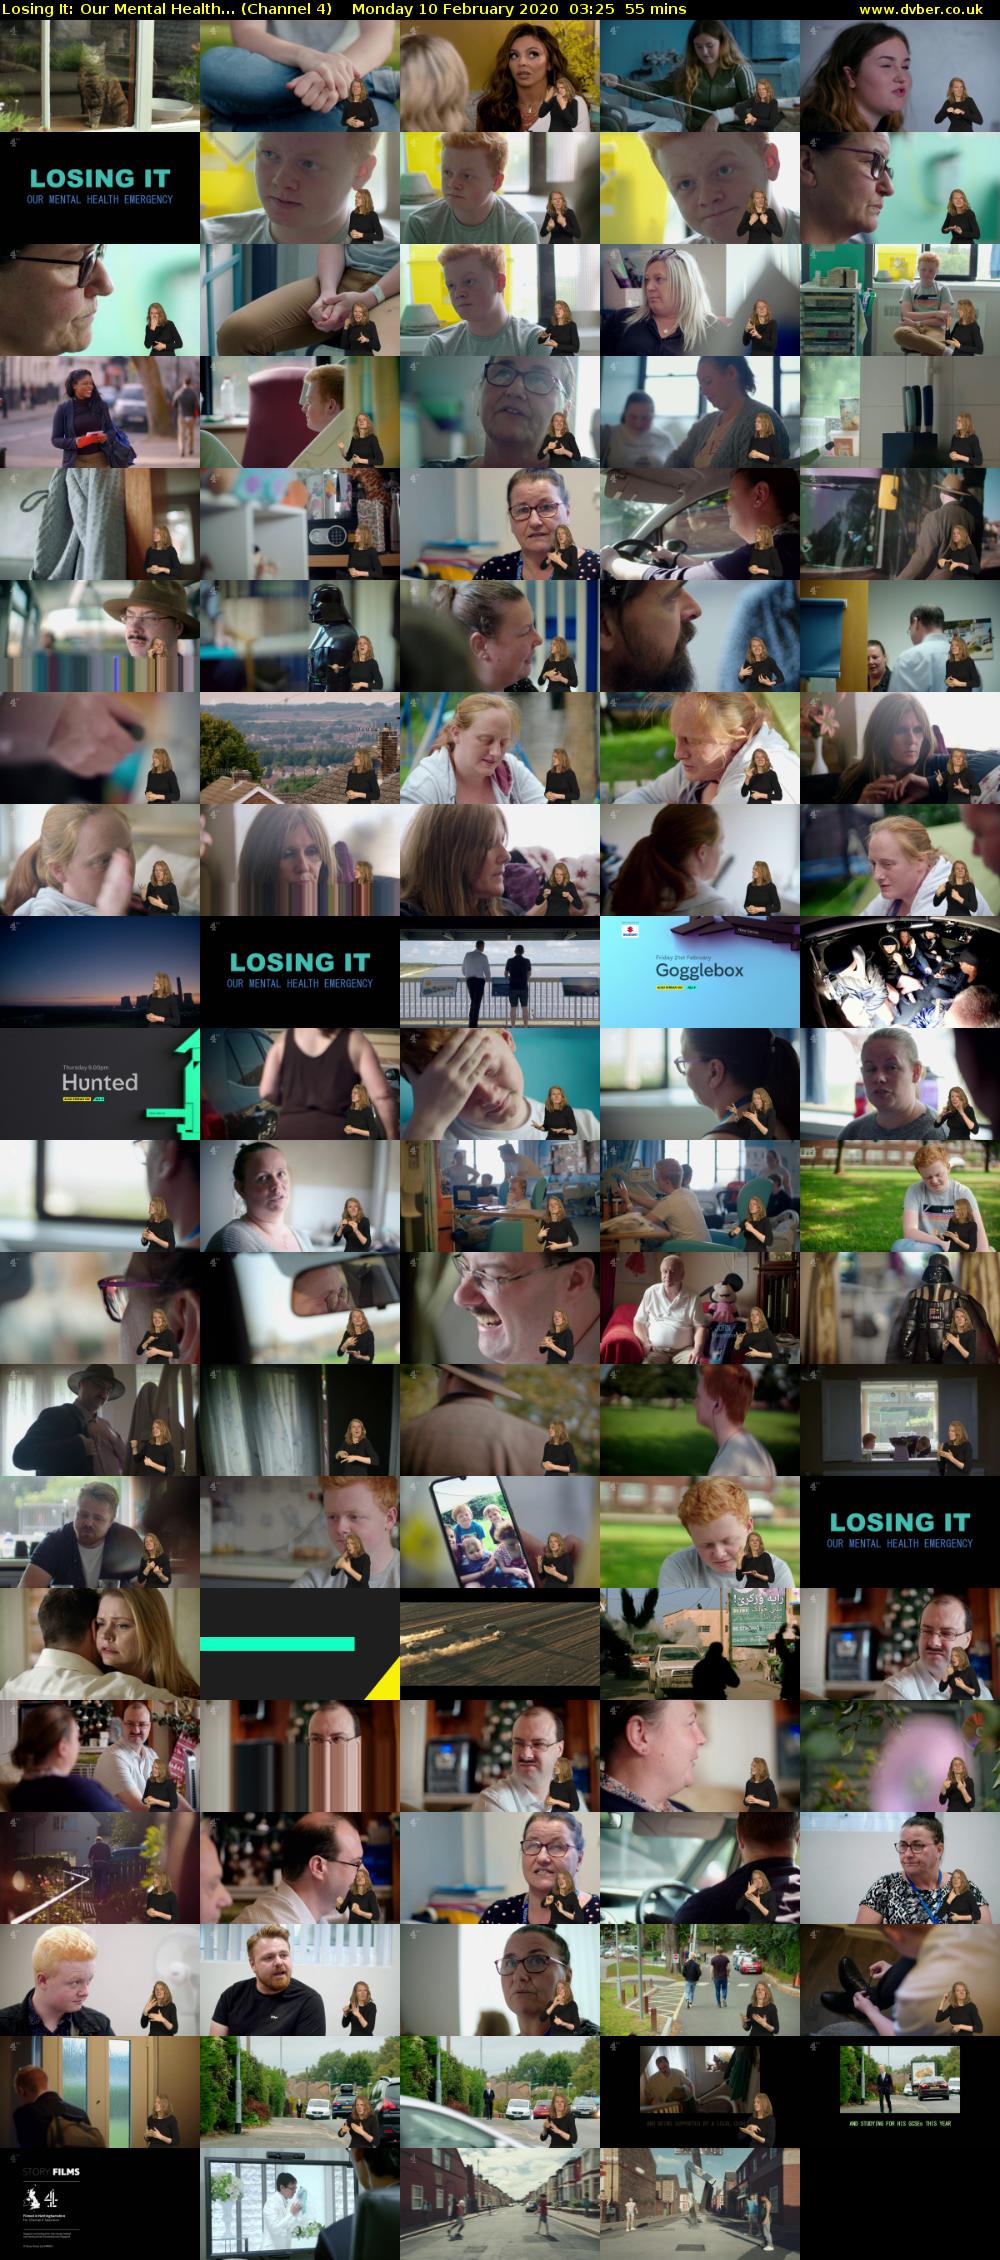 Losing It: Our Mental Health... (Channel 4) Monday 10 February 2020 03:25 - 04:20